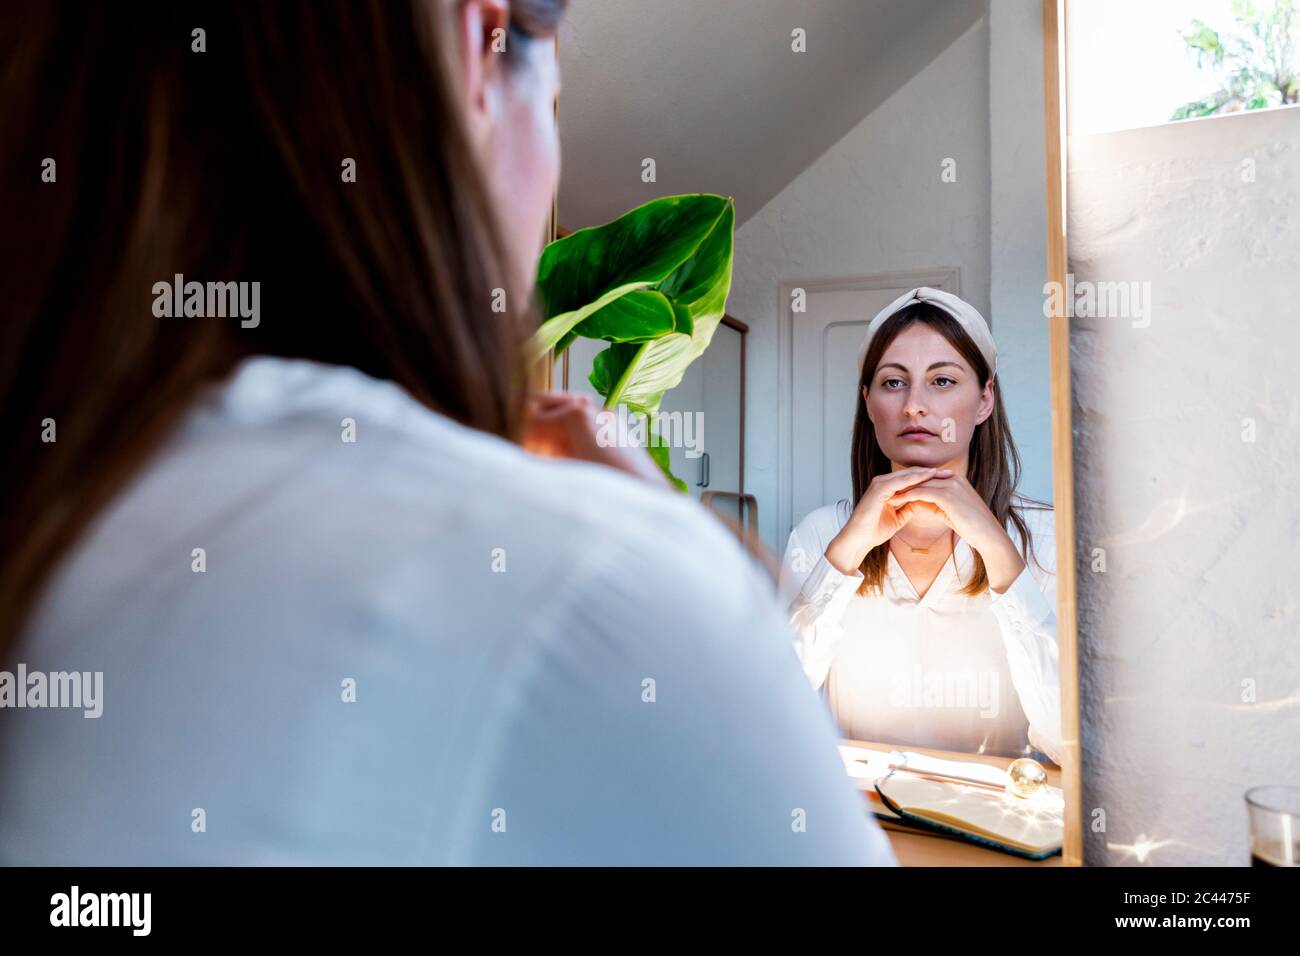 Beautiful woman looking at self in mirror reflection Stock Photo